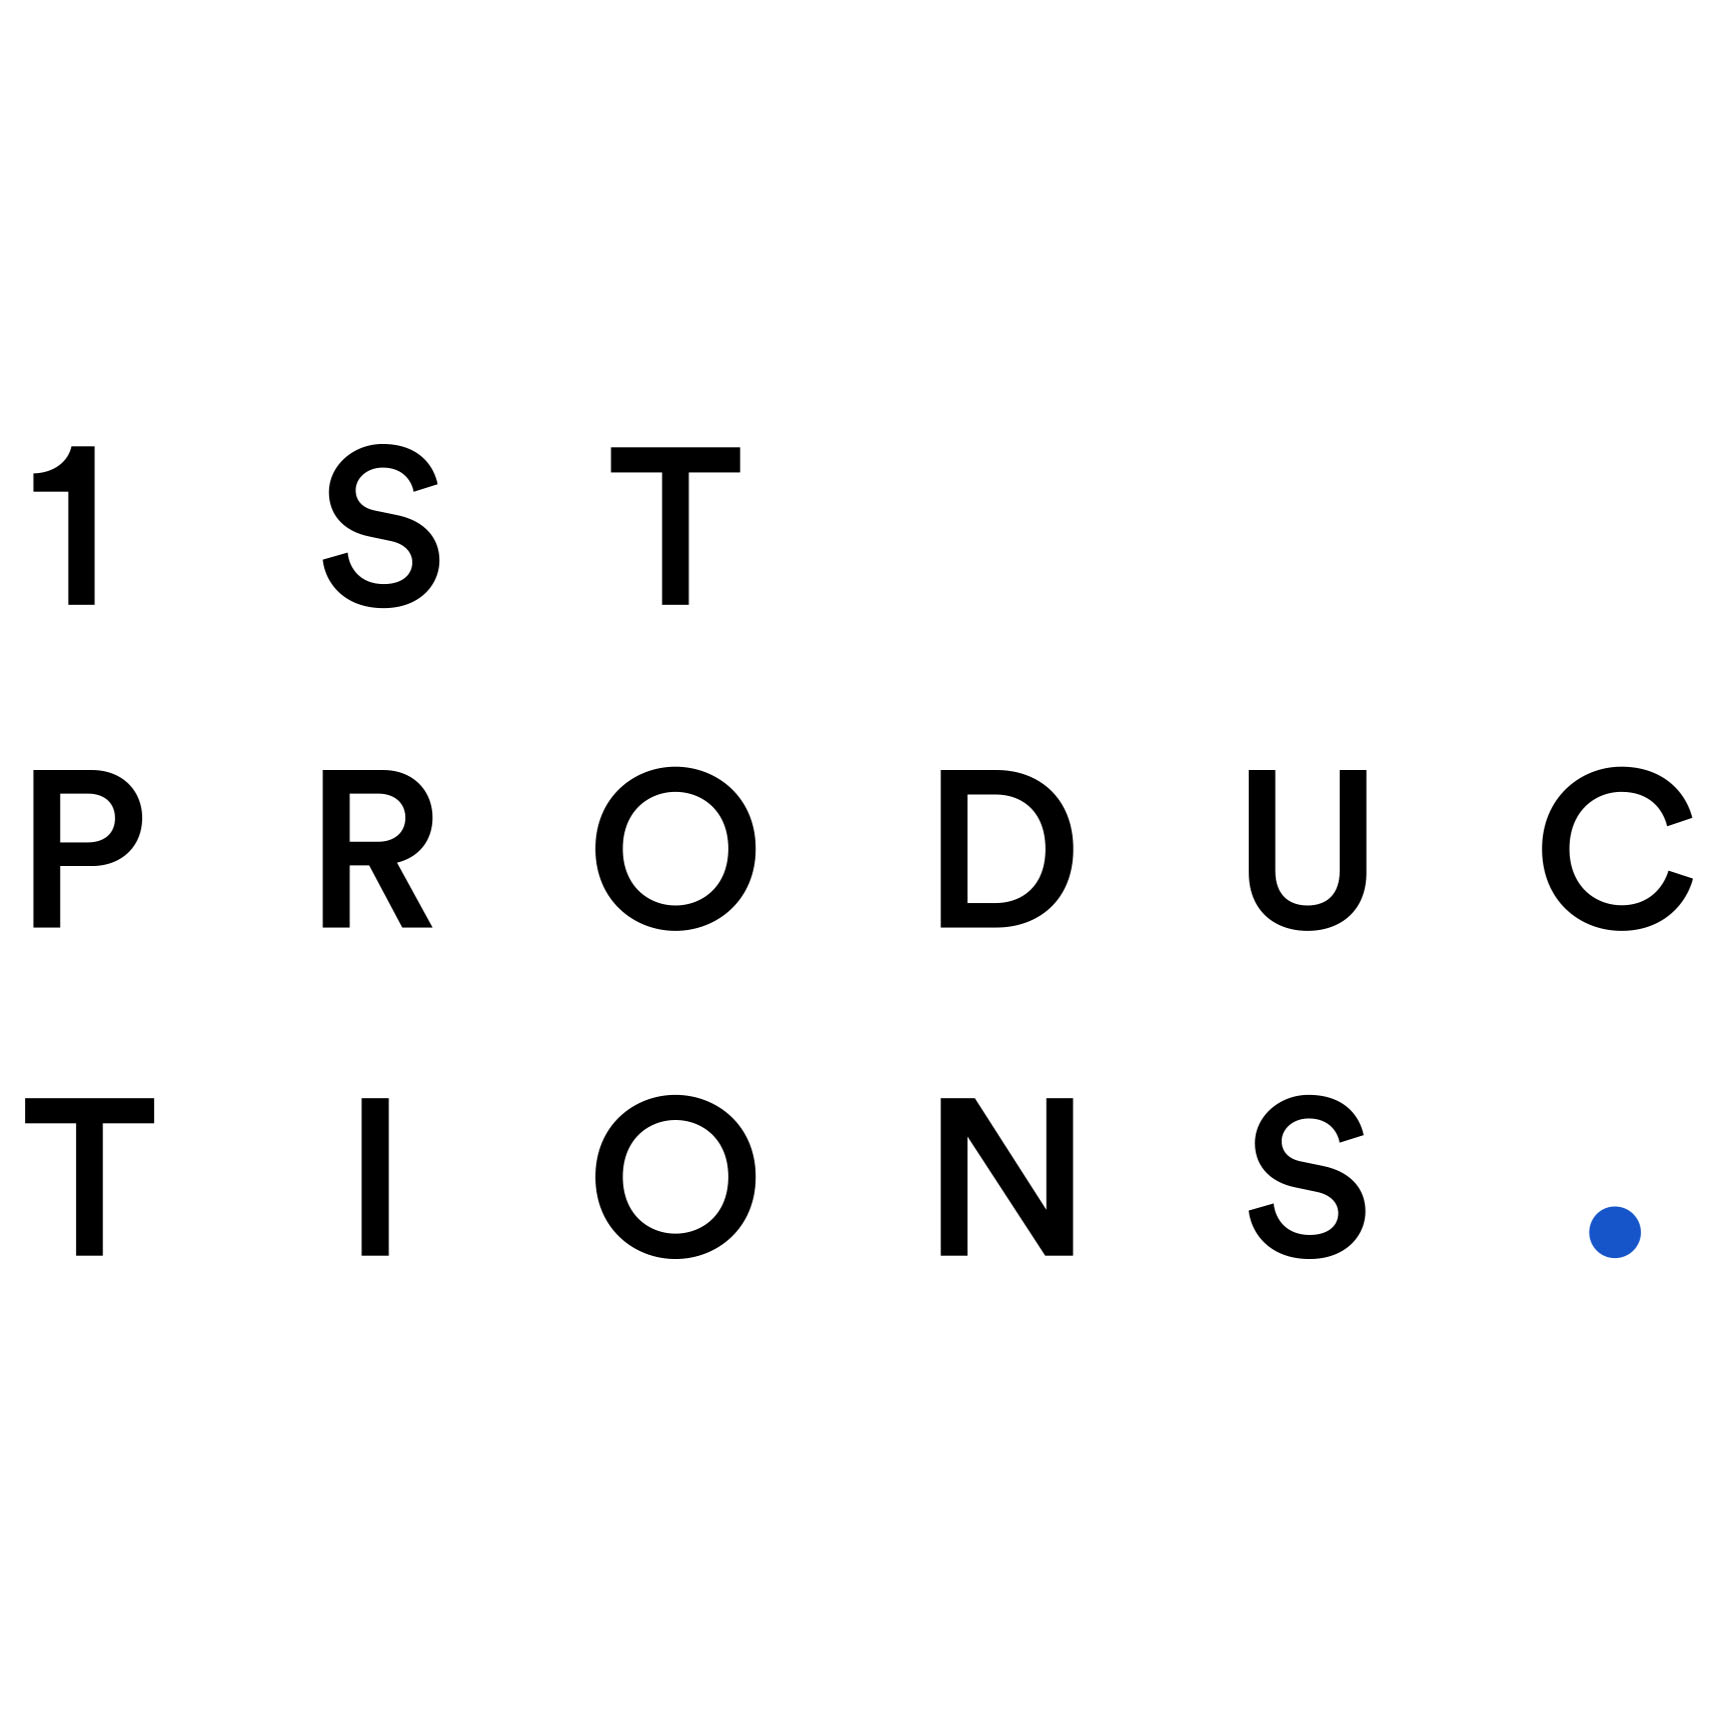 First Productions